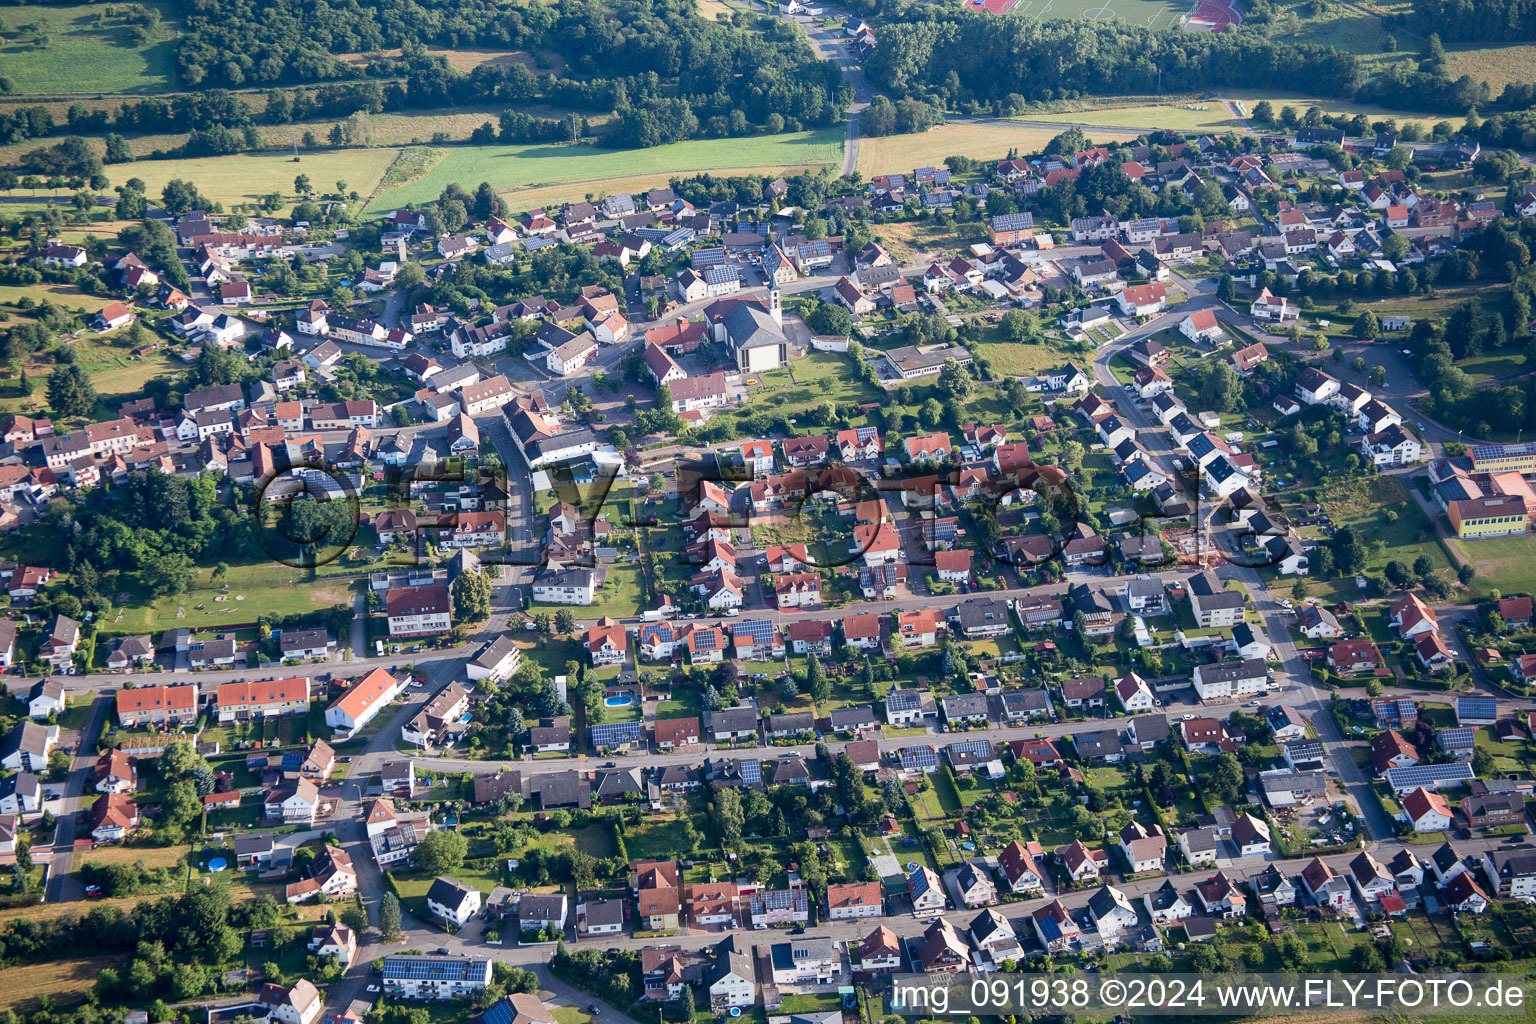 Town View of the streets and houses of the residential areas in Schoenenberg-Kuebelberg in the state Rhineland-Palatinate, Germany